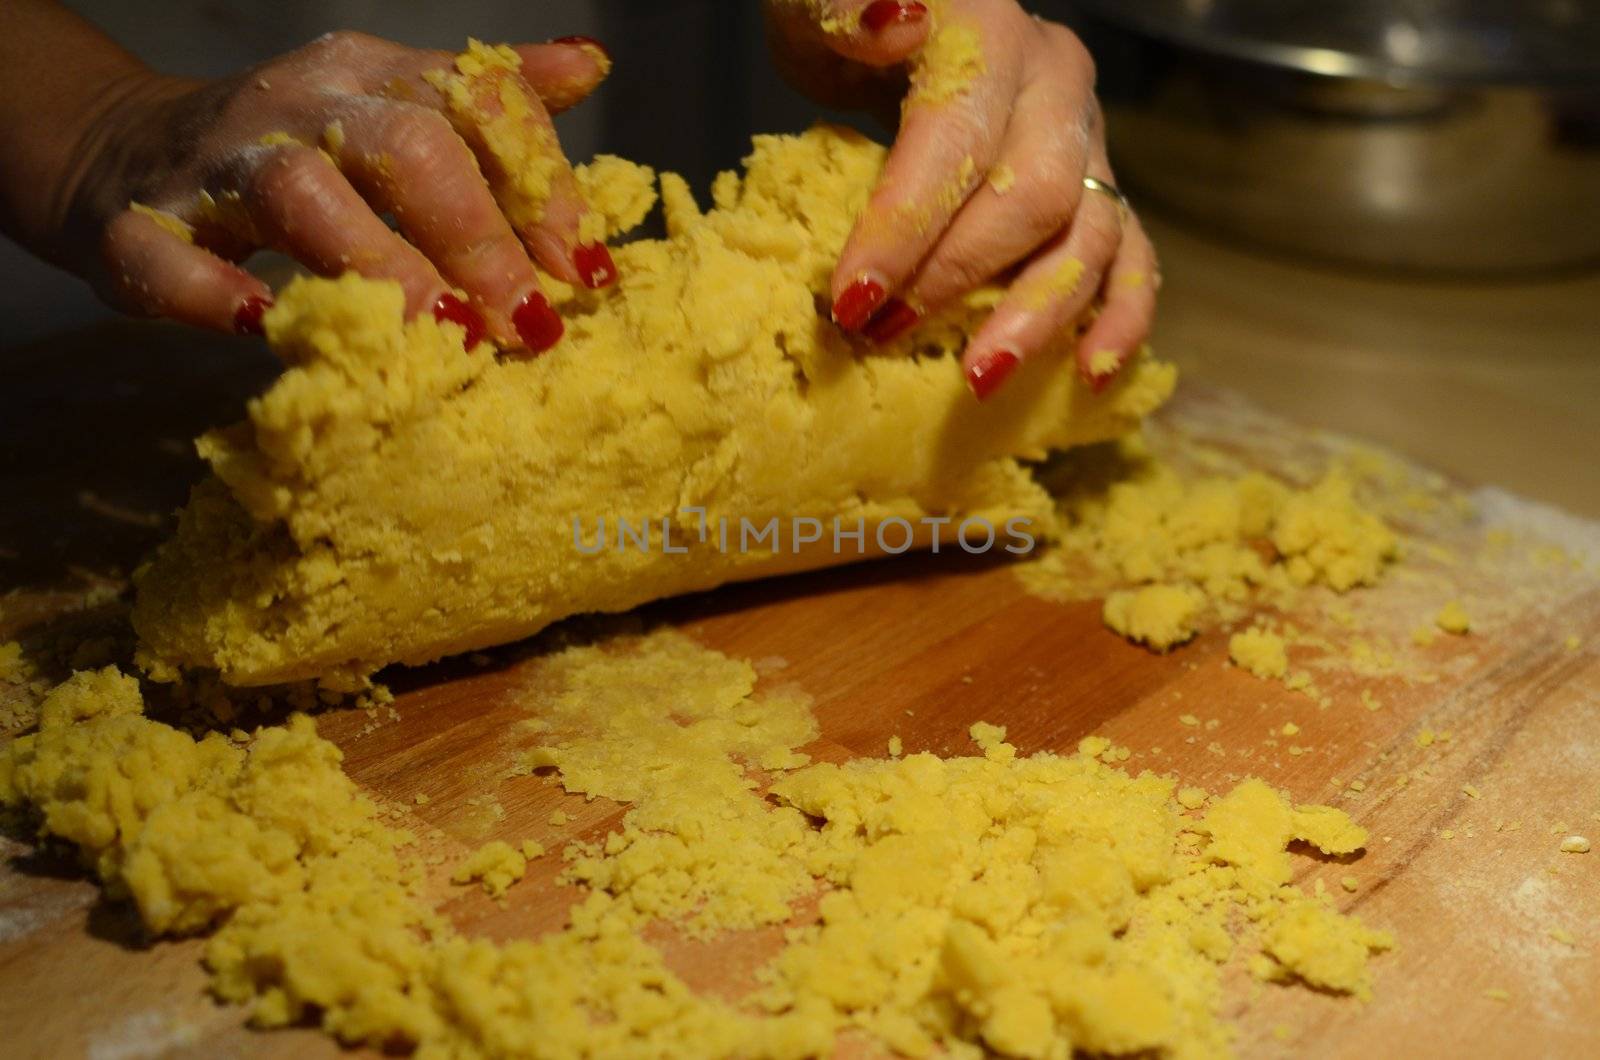 The making of a traditional dish of the italian cuisine